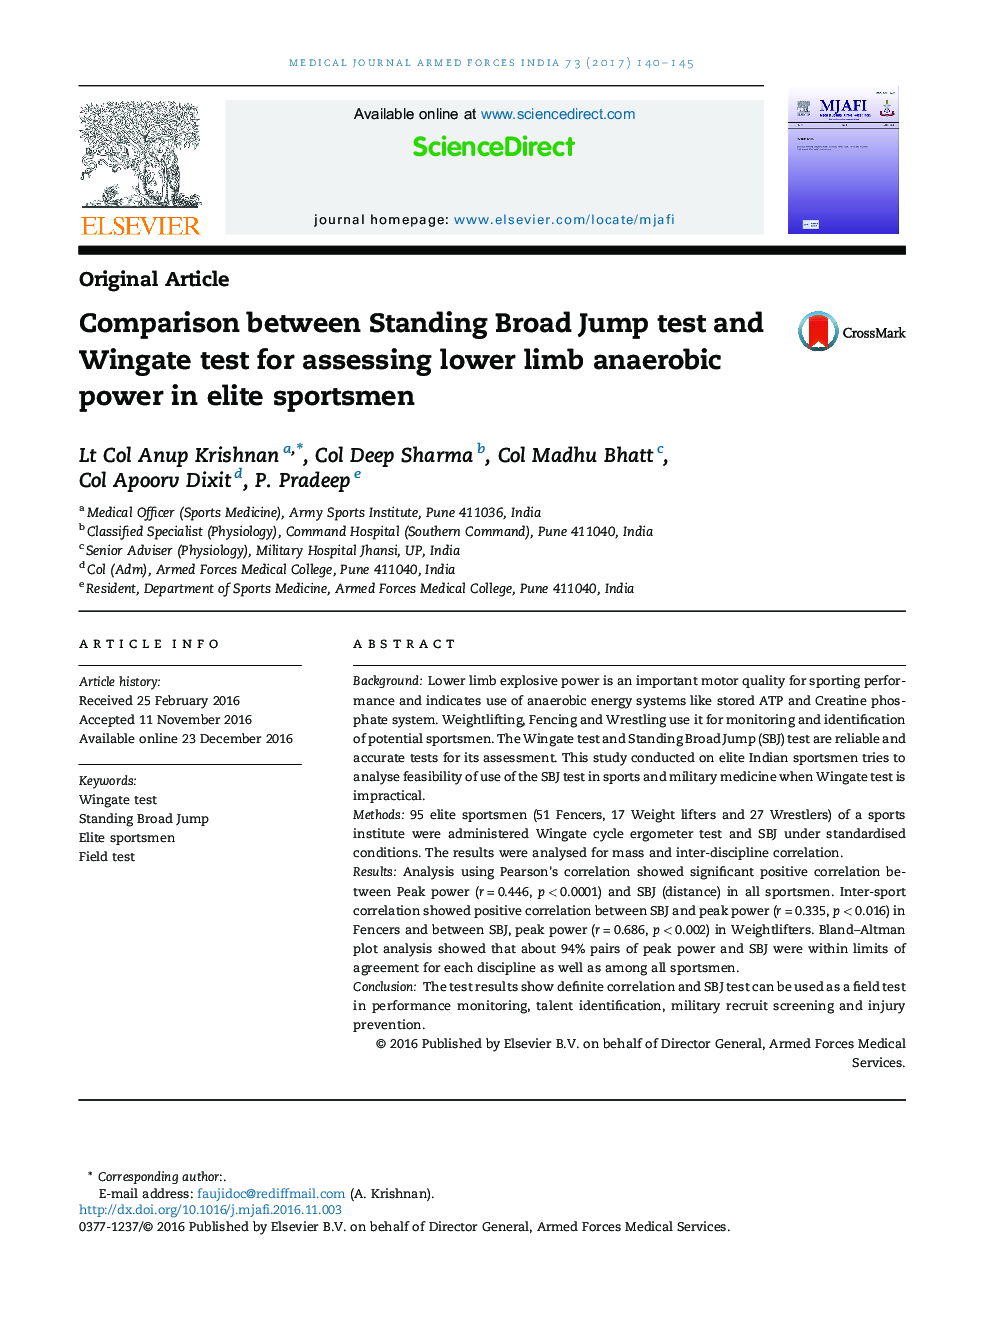 Comparison between Standing Broad Jump test and Wingate test for assessing lower limb anaerobic power in elite sportsmen